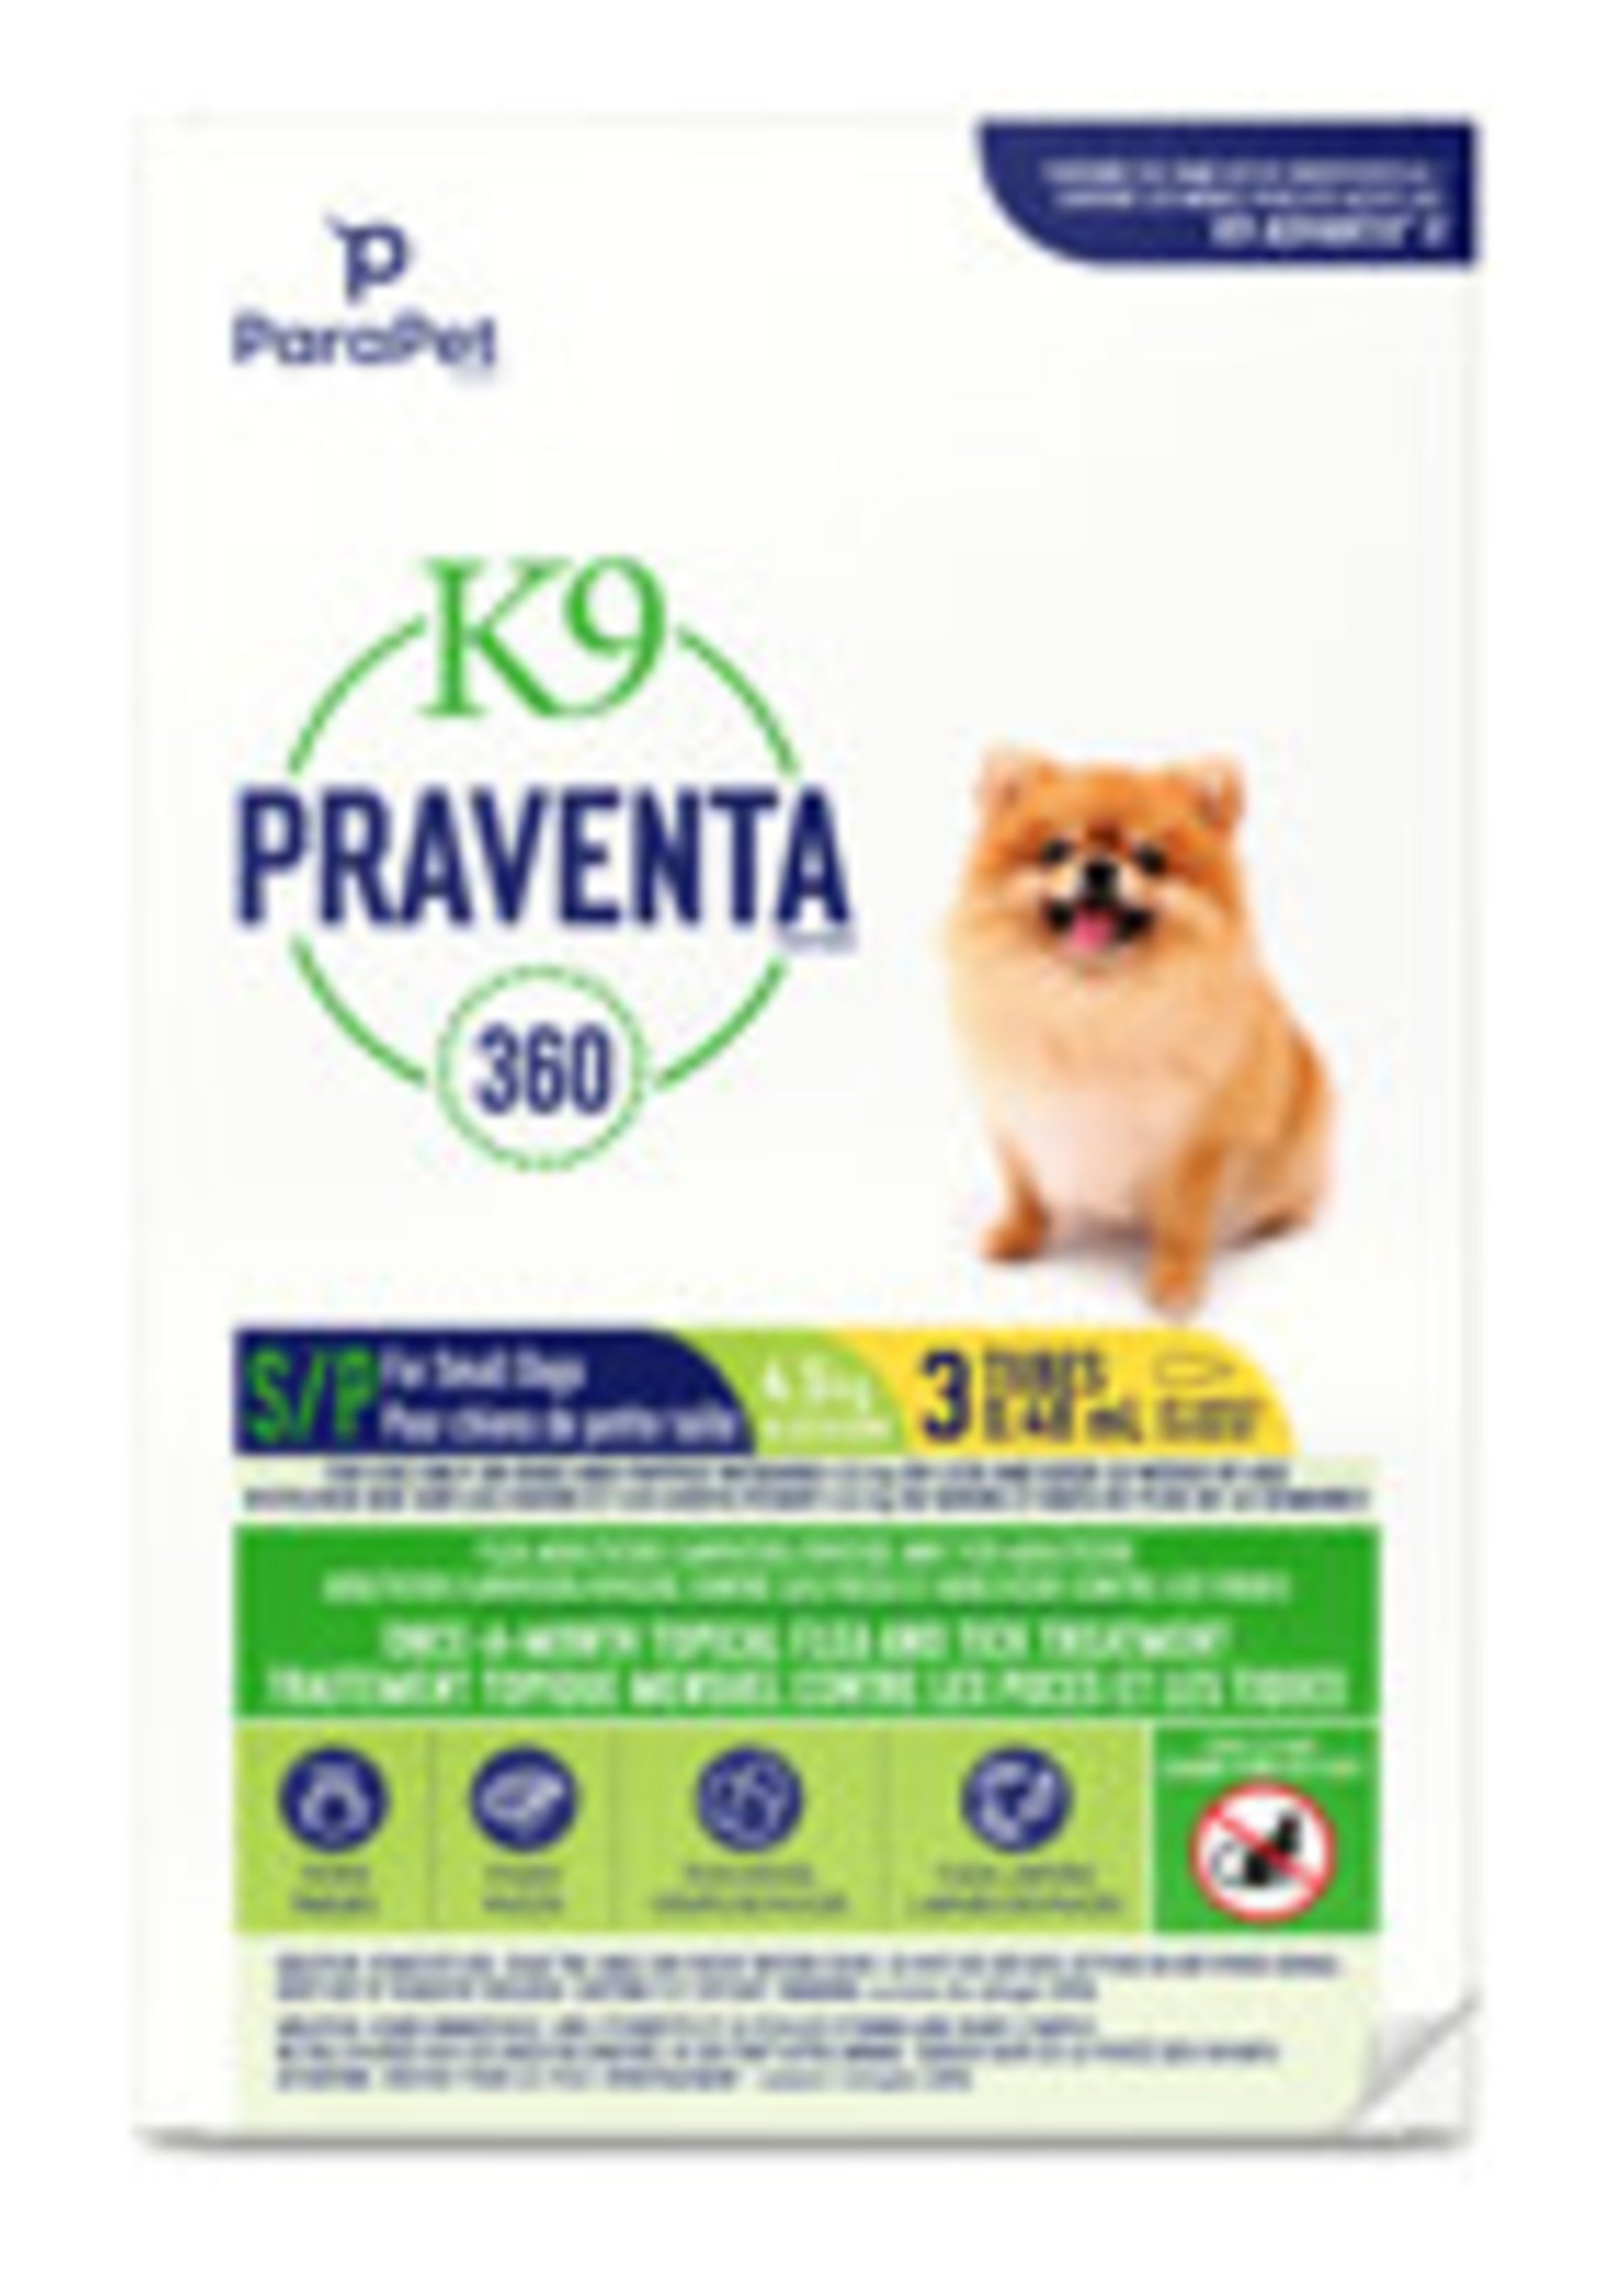 ParaPet™ K9 Praventa 360™ for Small Dogs up to 4.5kG